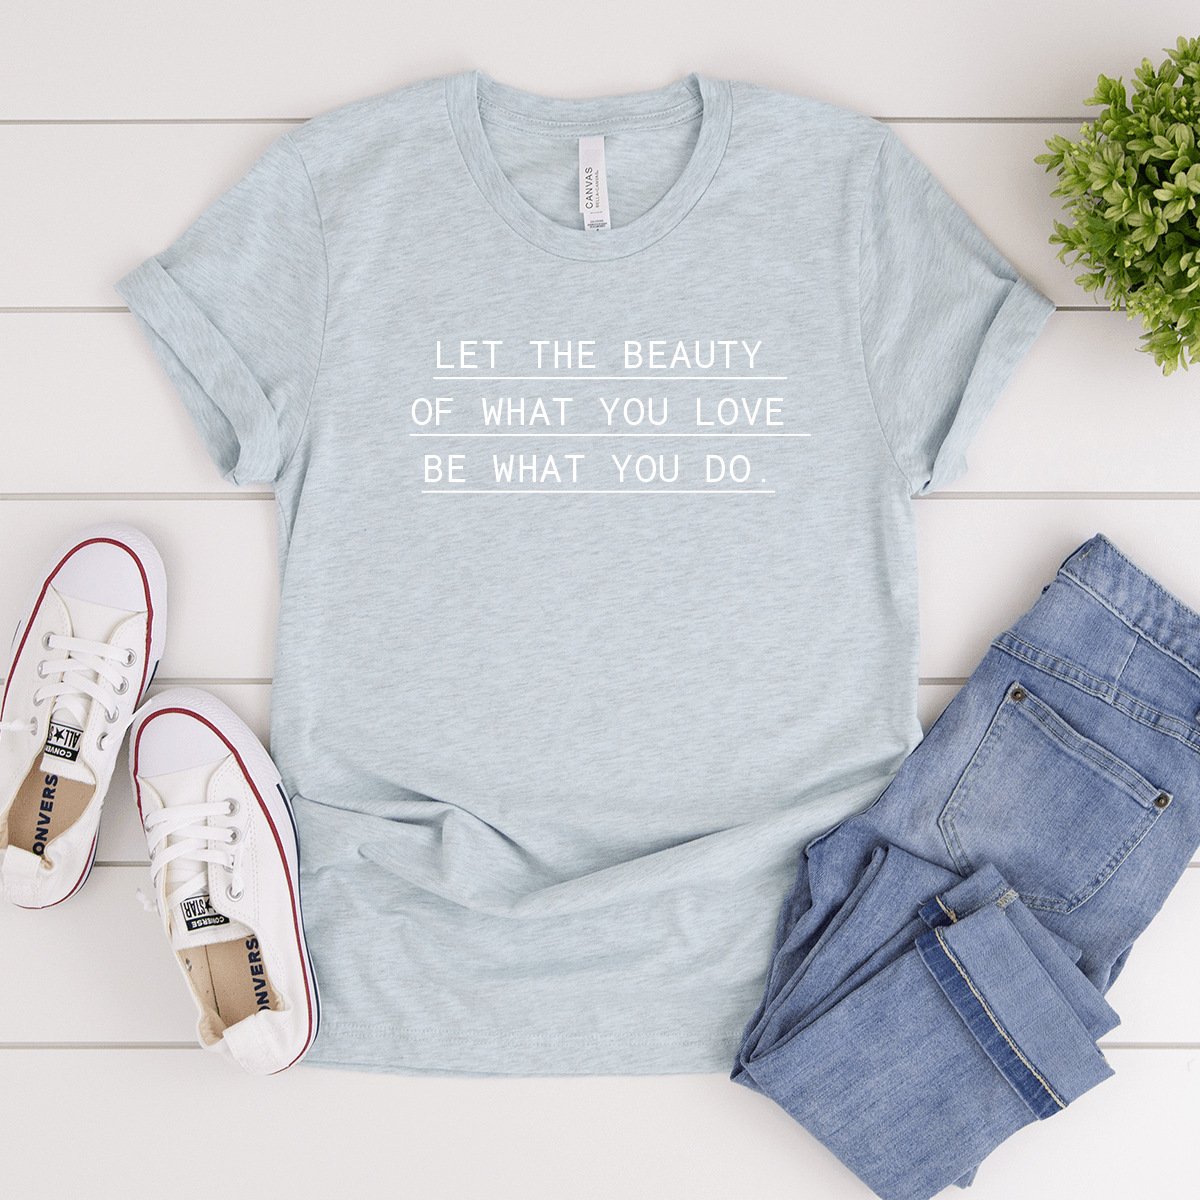 Let The Beauty Of What You Love, Be What You Do - Bella+Canvas Tee